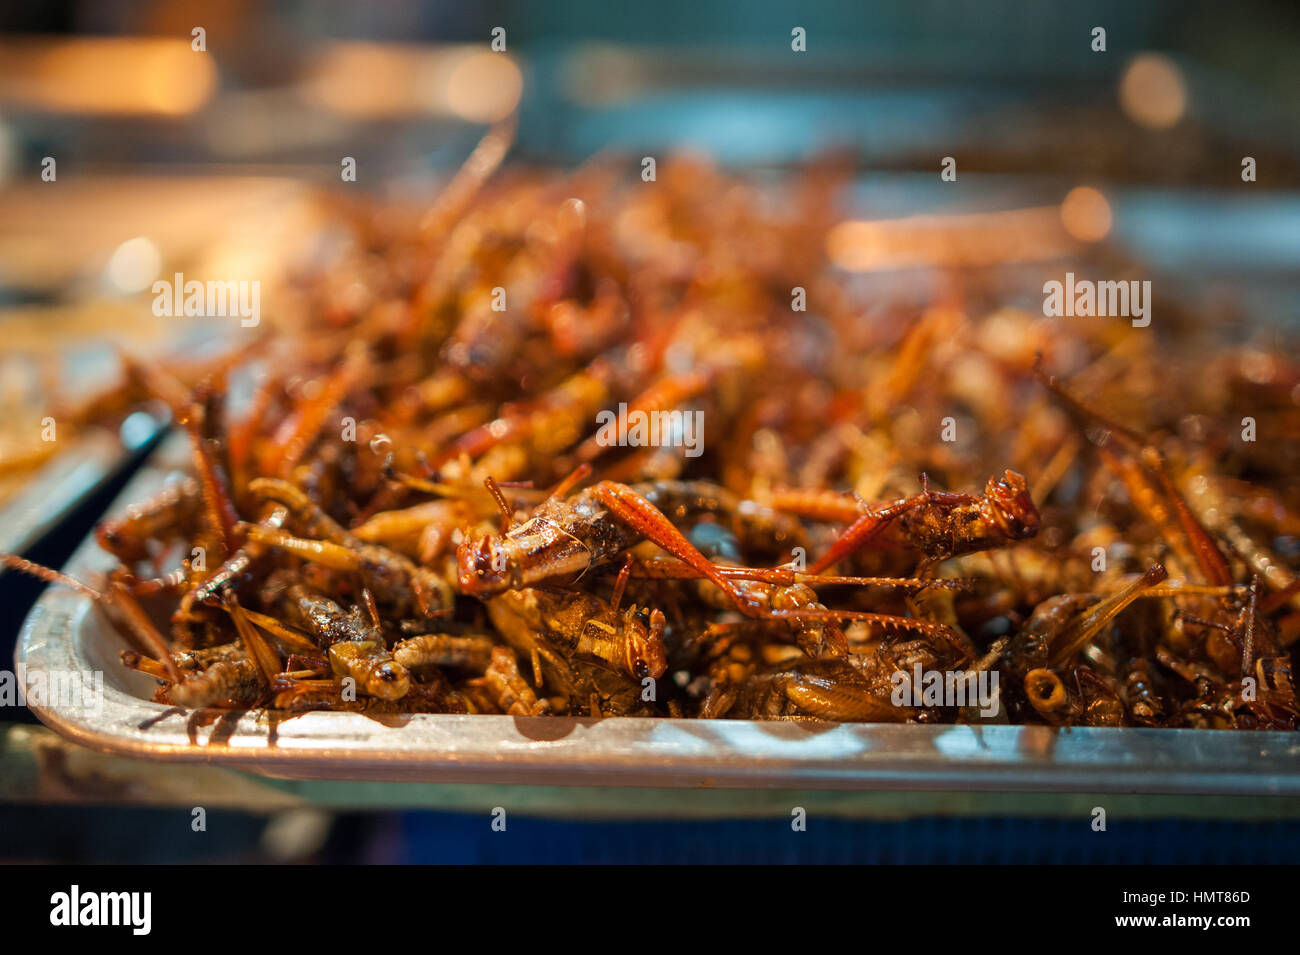 Worms and grasshoppers served as food in Bangkok, Thailand. Stock Photo